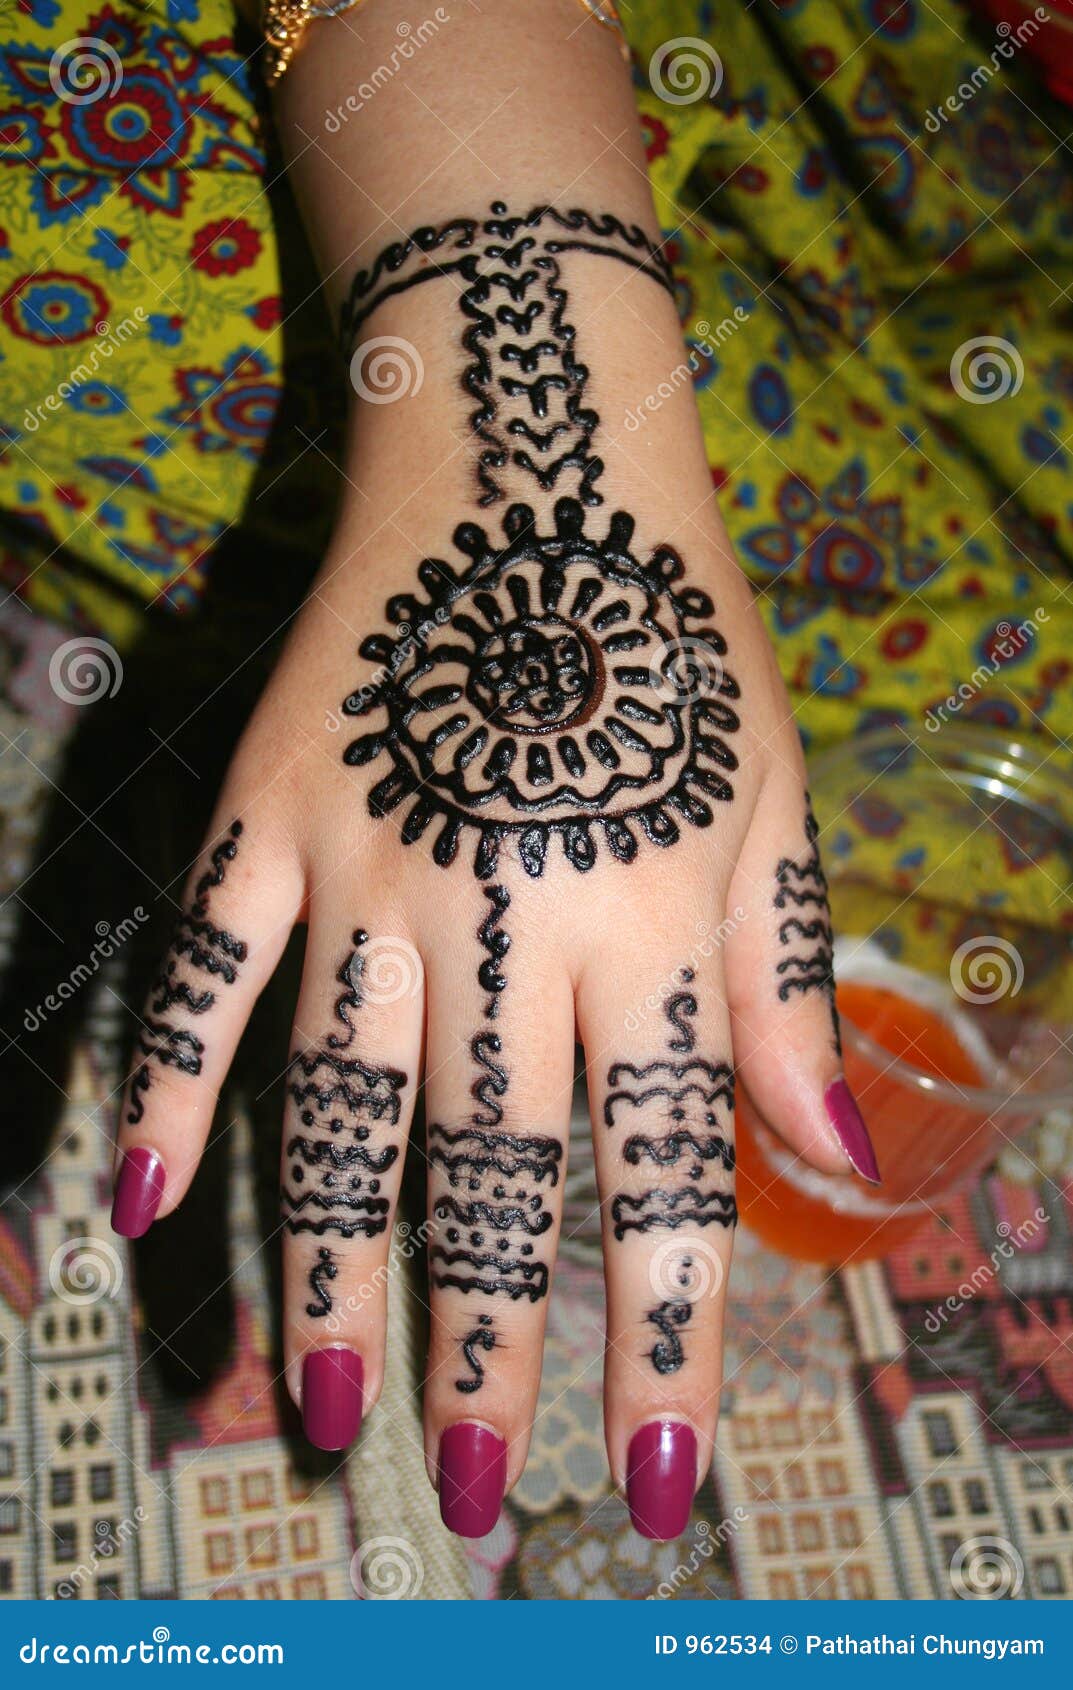 Henna Hand Stock Images - Image: 962534